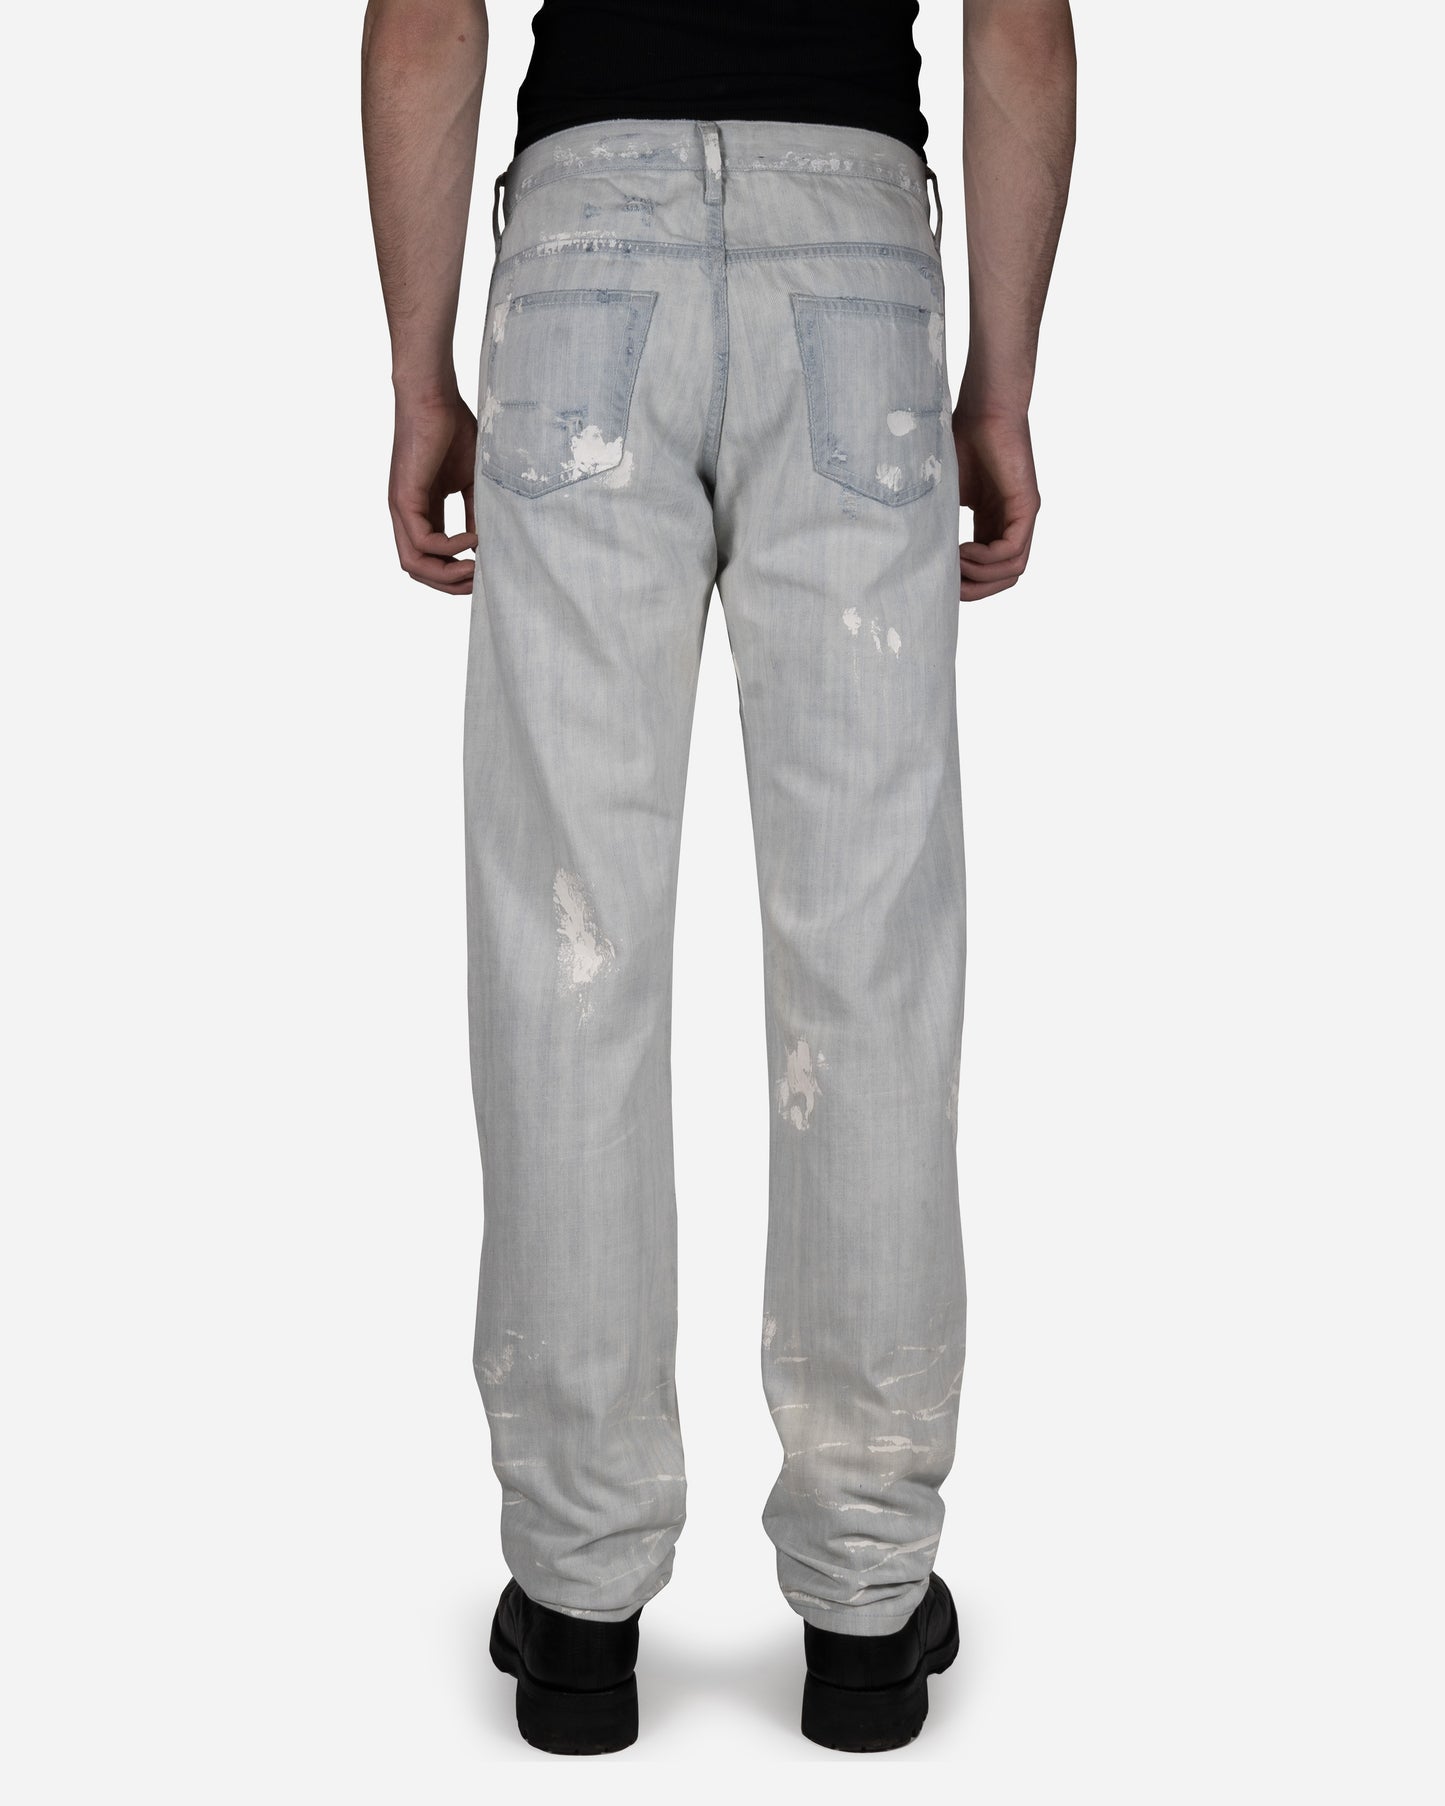 Washed Painter Jeans